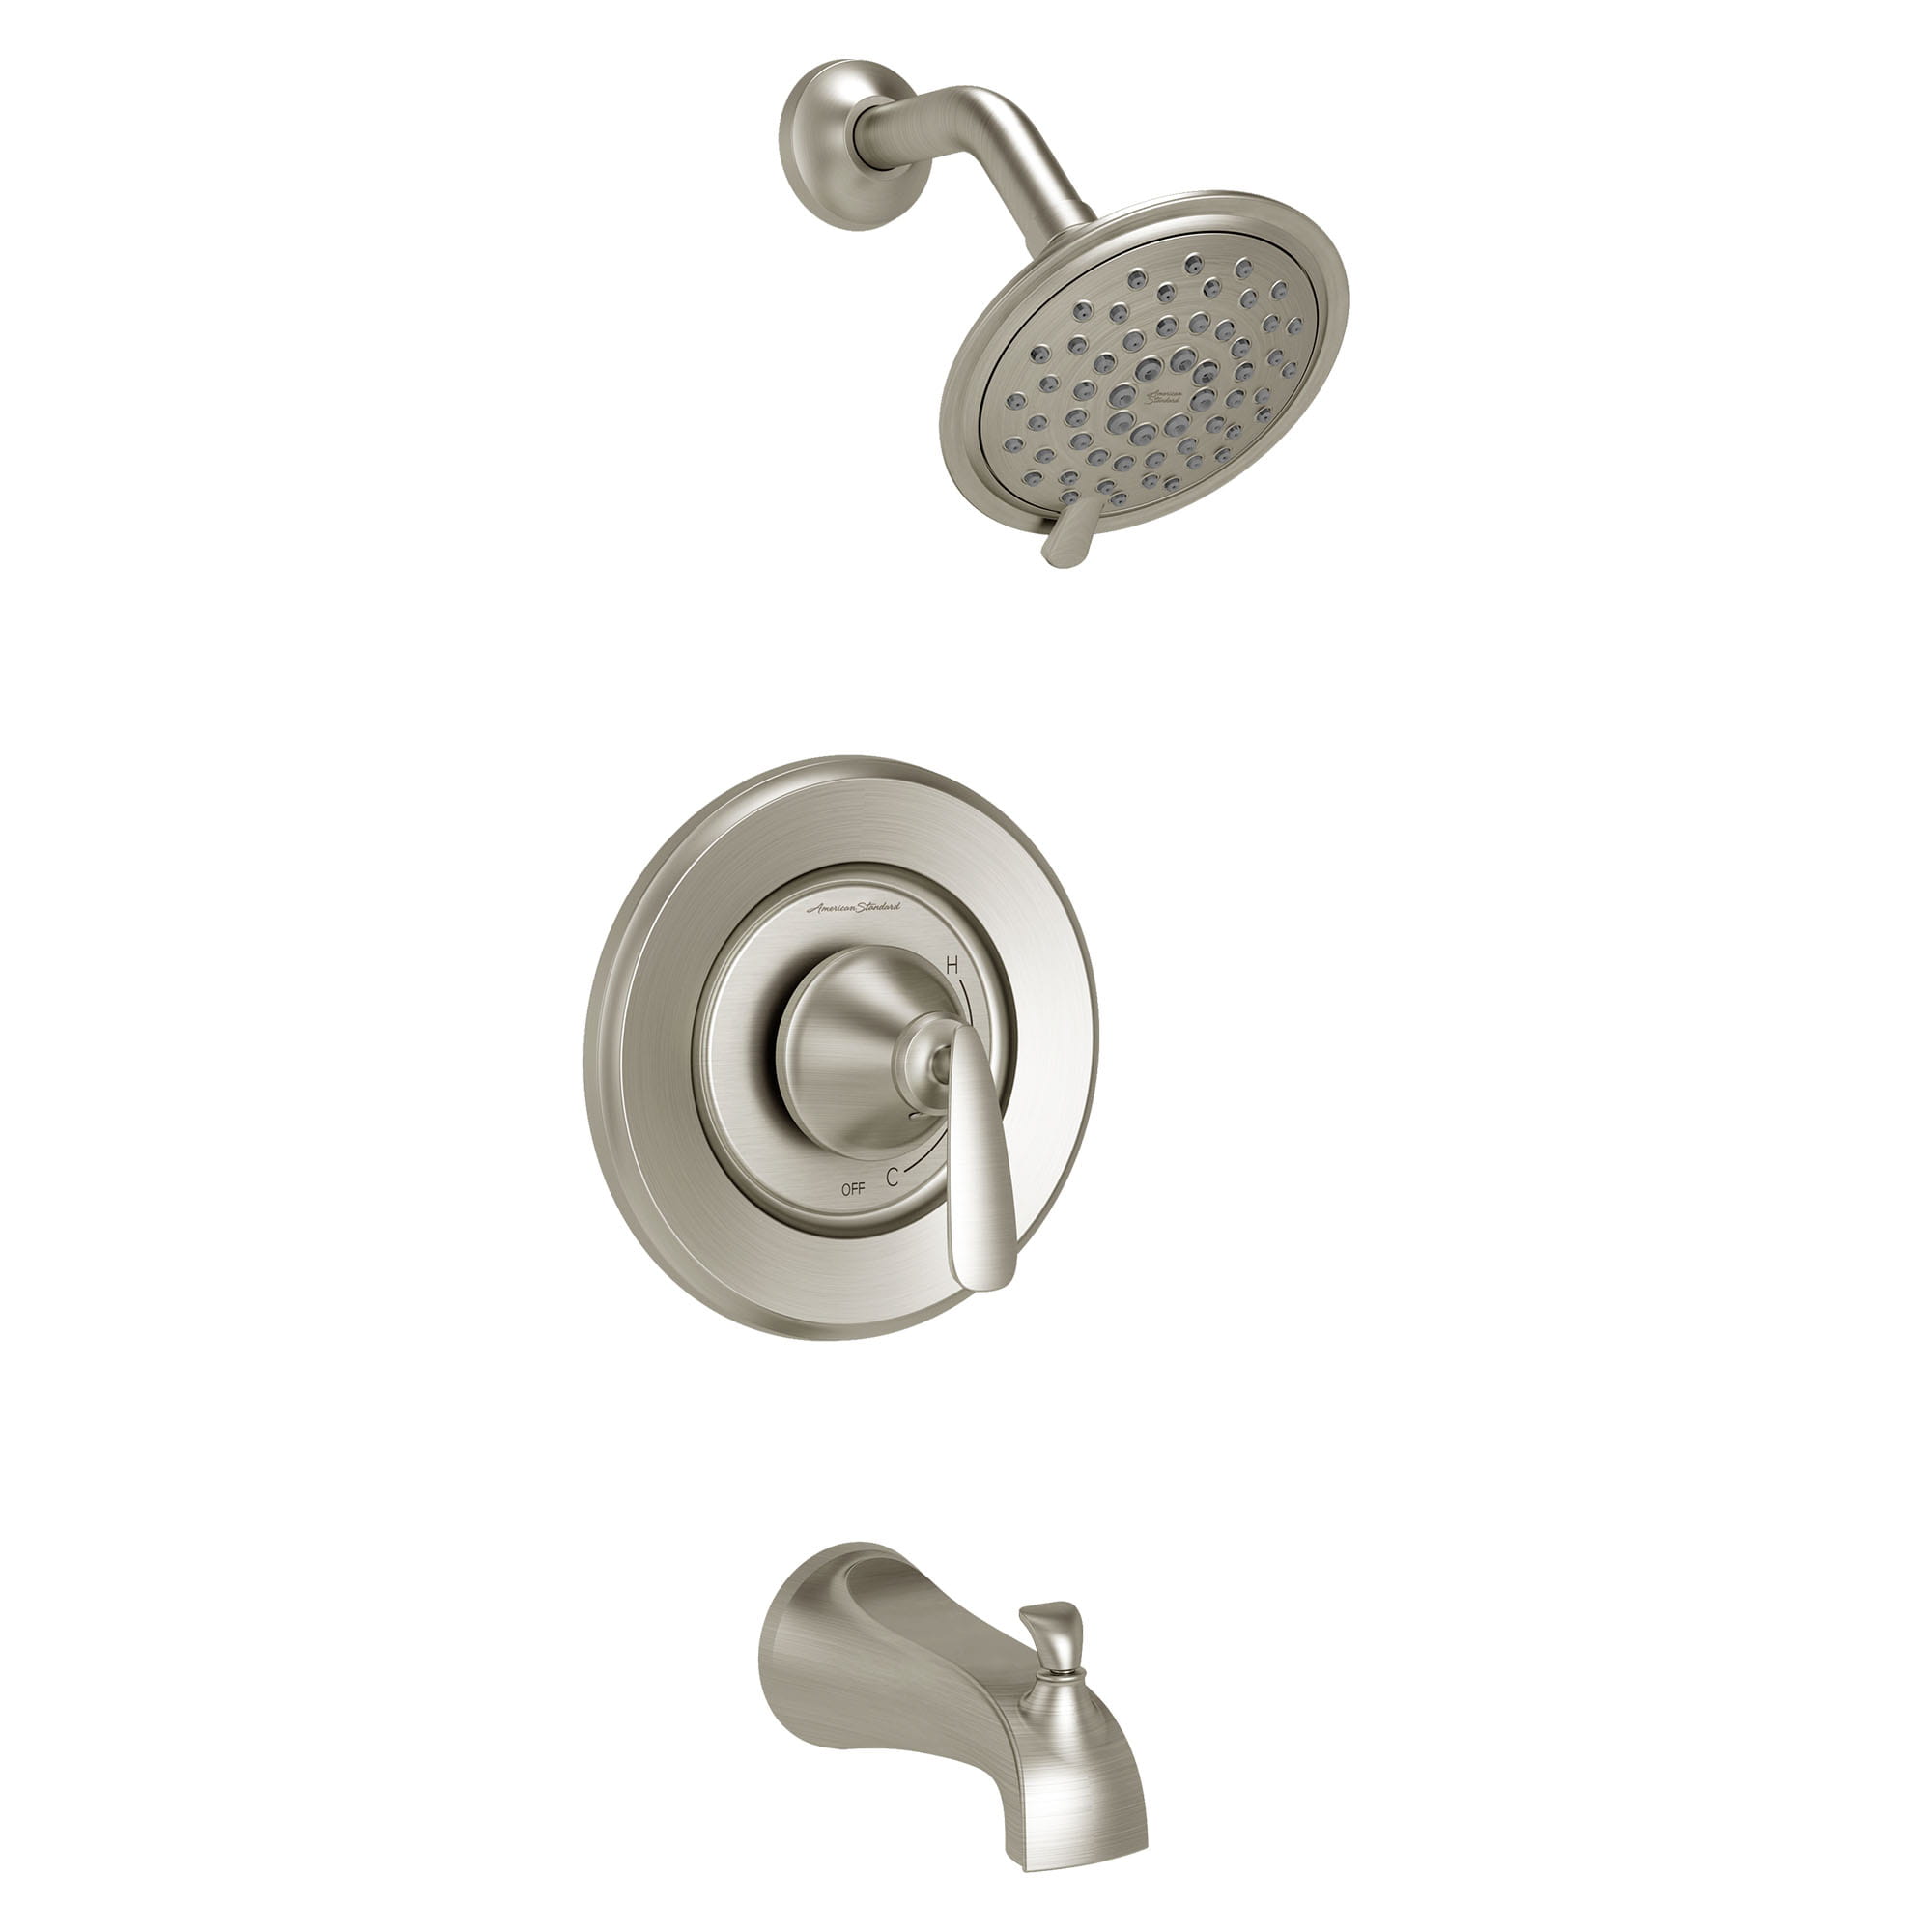 Somerville 18 GPM Tub and Shower Trim Kit with Ceramic Disc Valve Cartridge and Lever Handle BRUSHED NICKEL